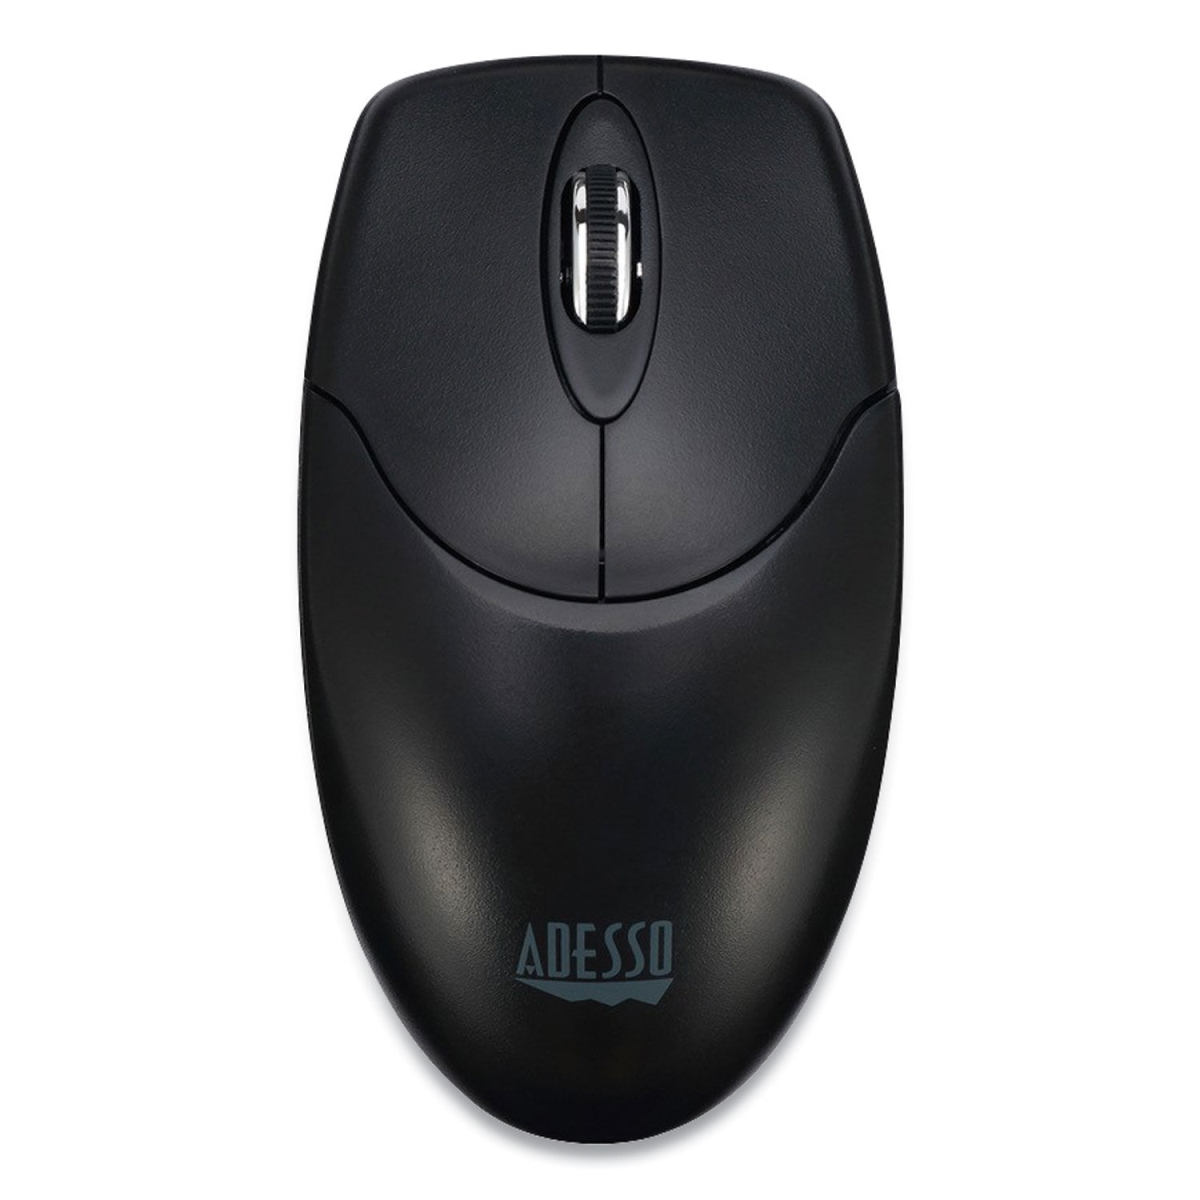 Picture of Adesso ADEM60 protective Vertical Wireless Mouse, Black